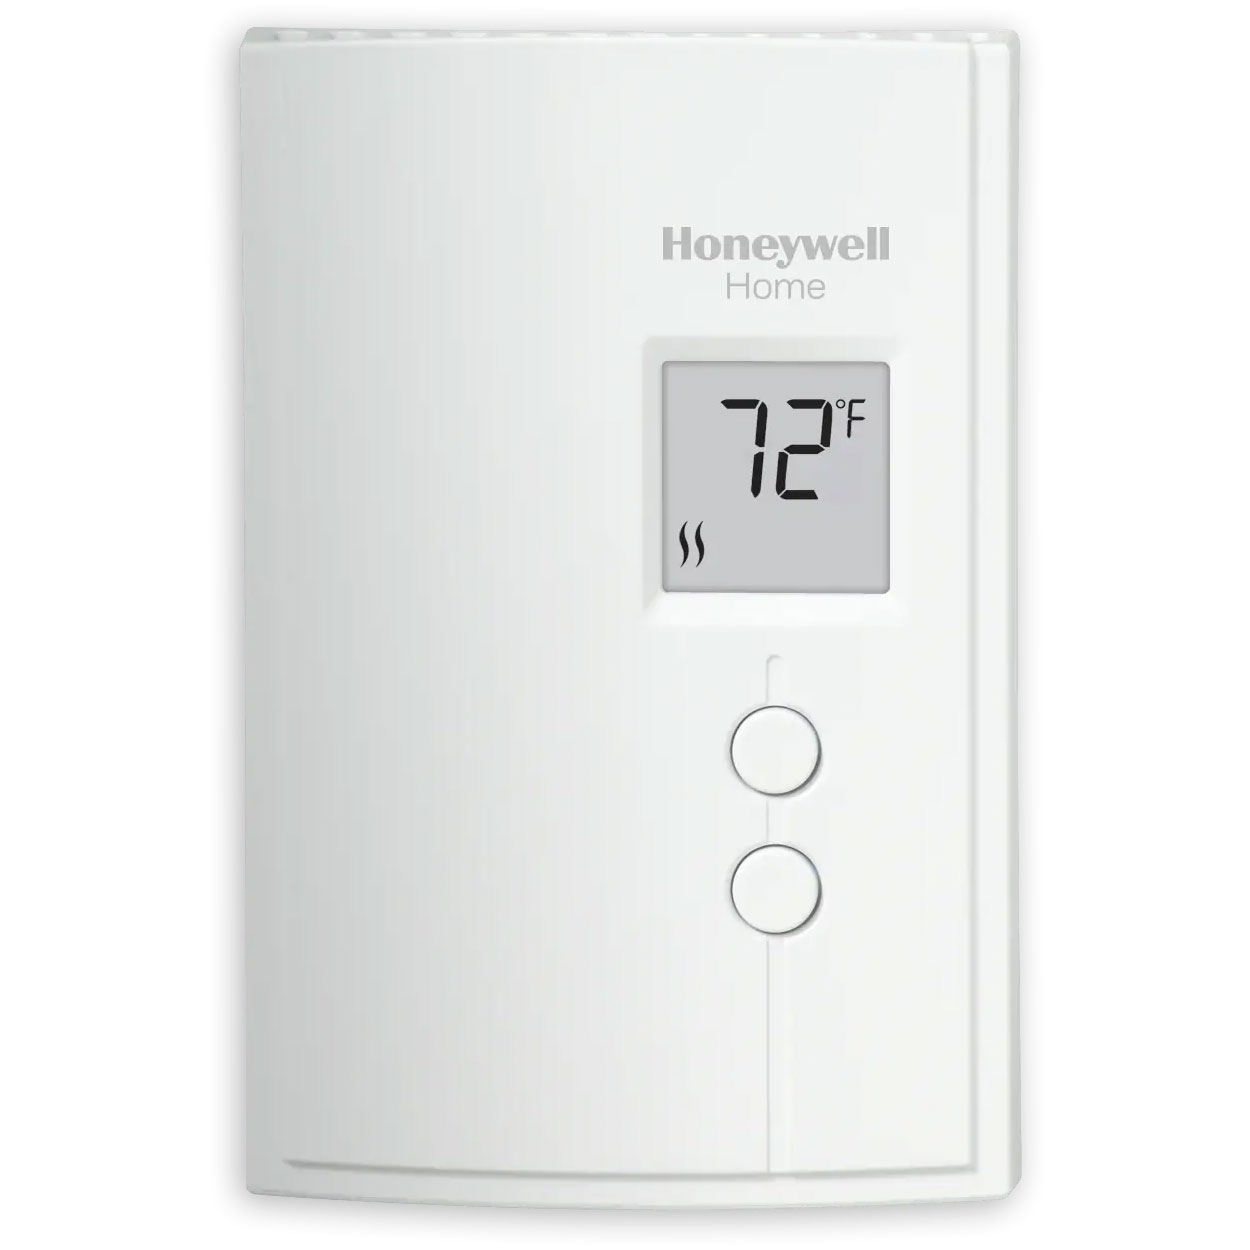 Columbus Electric Programmable Thermostat Manual